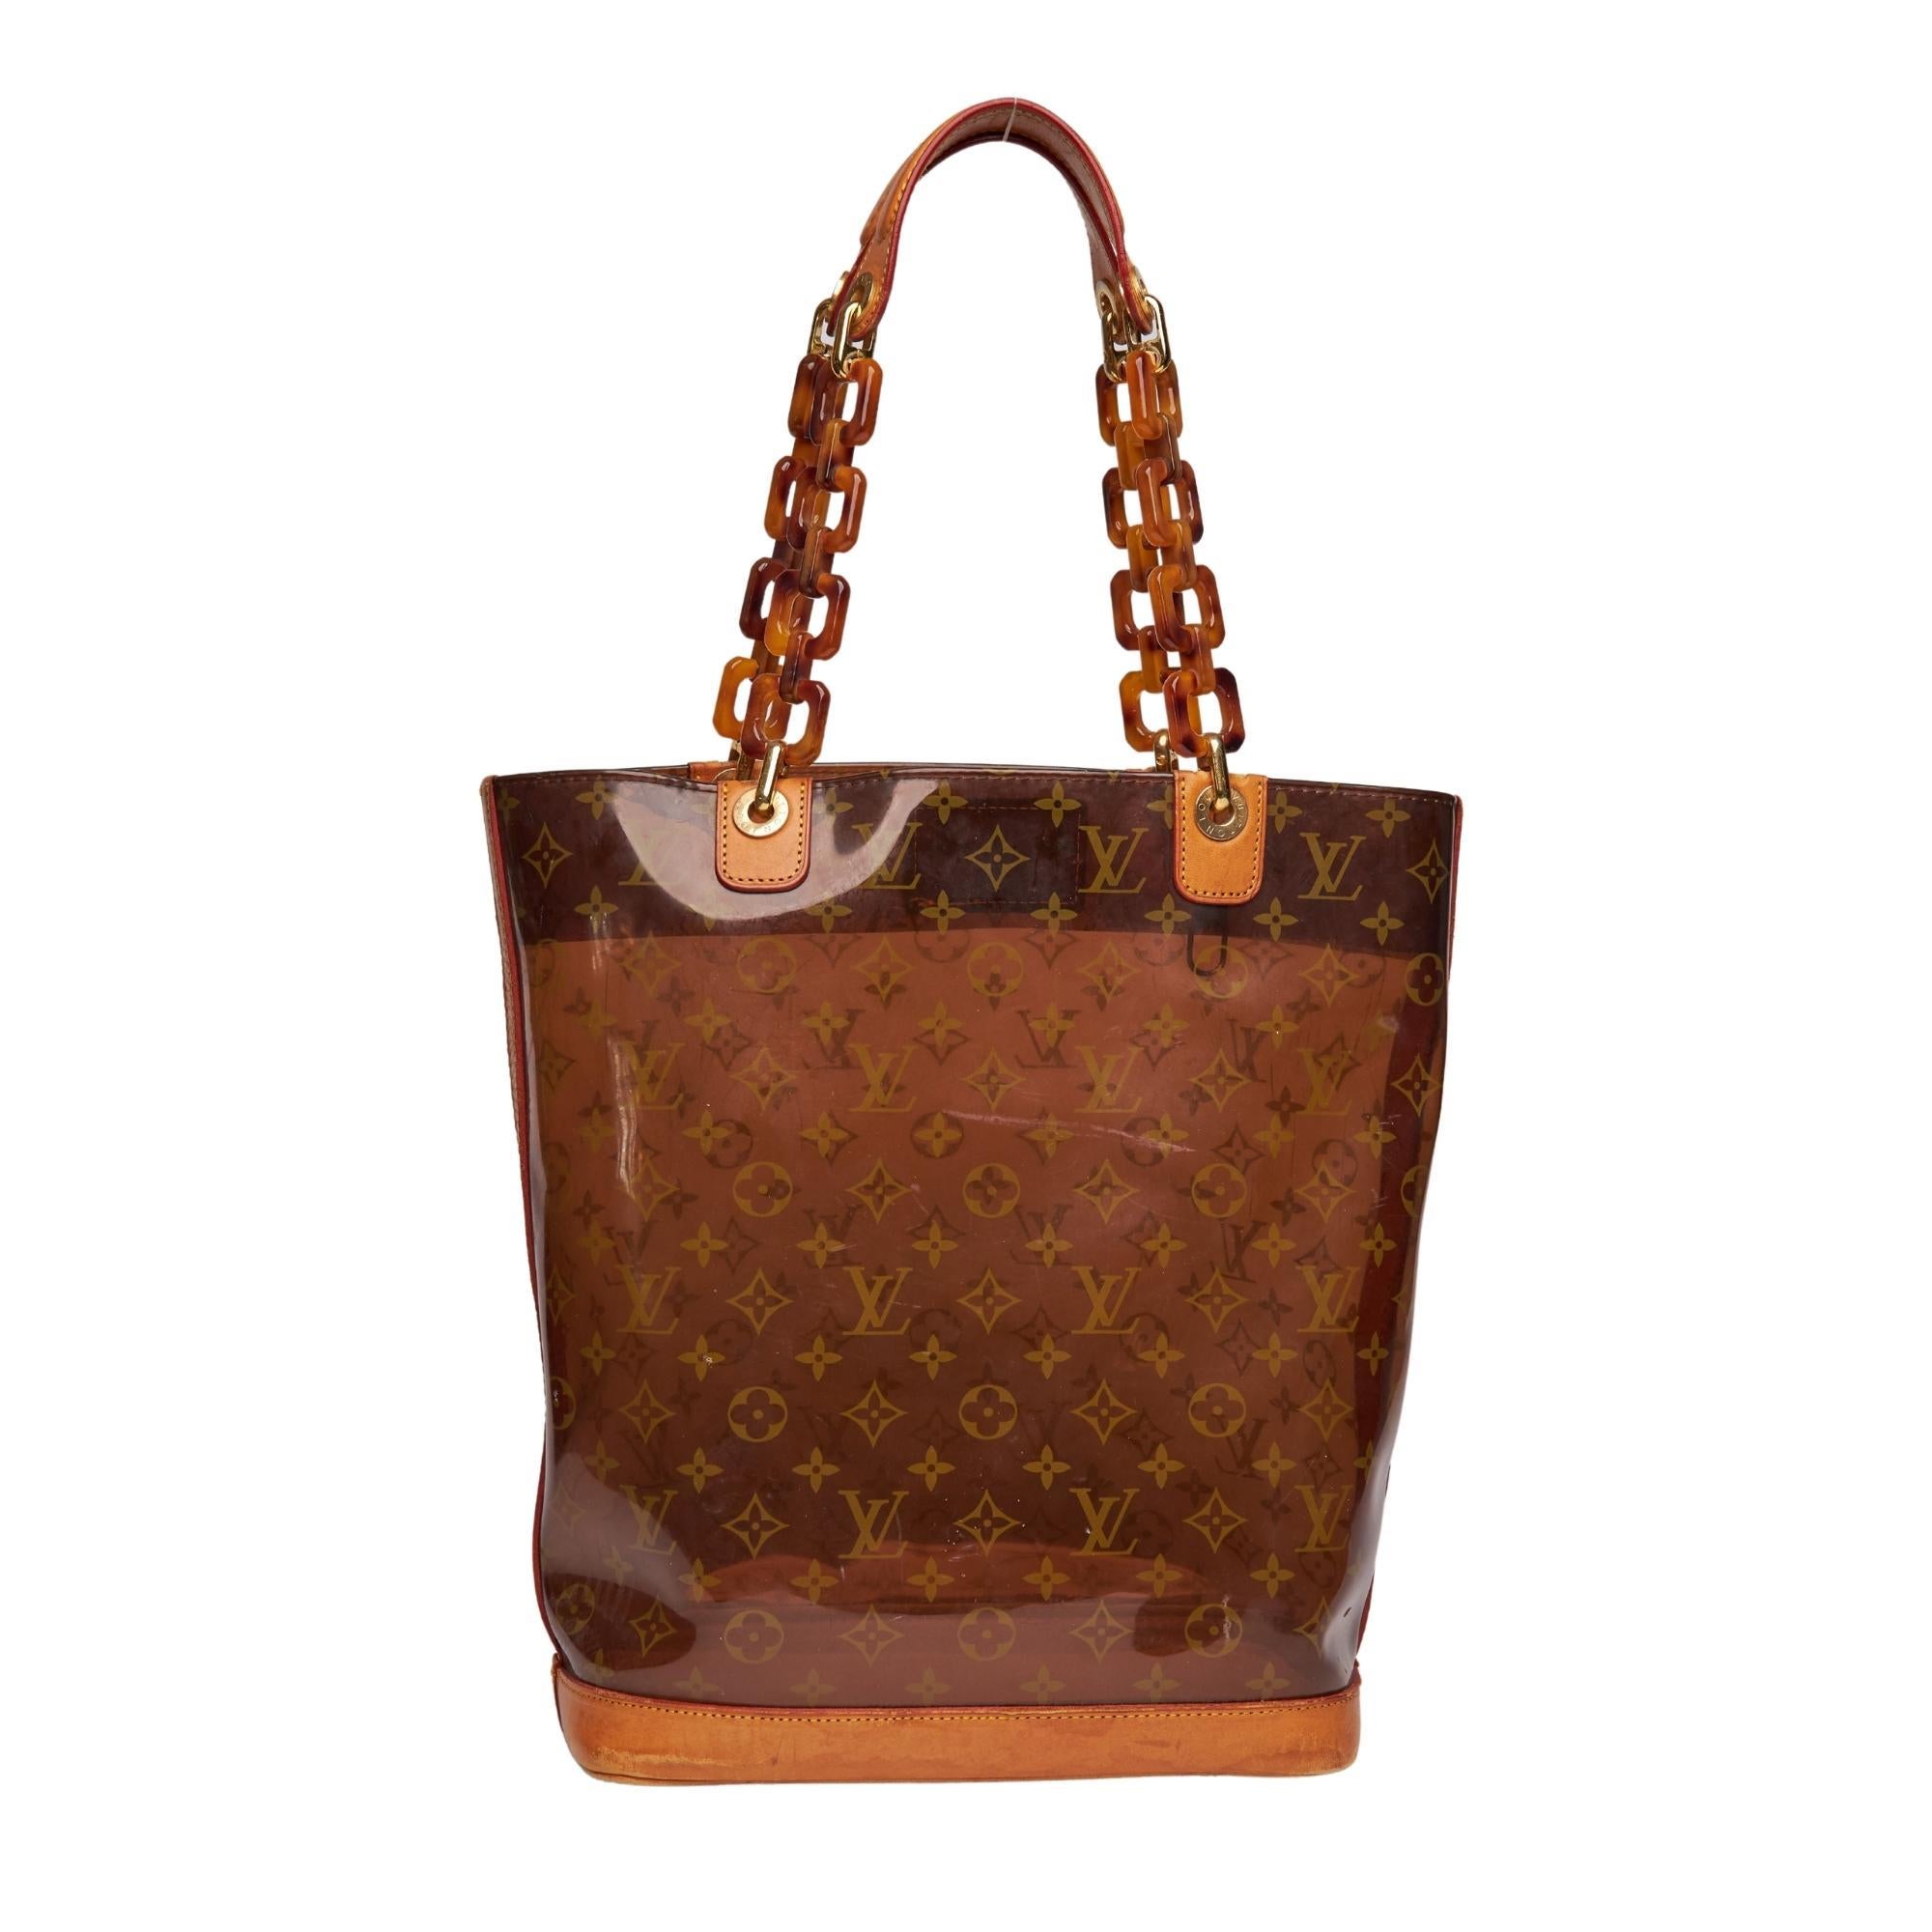 
This bag is made of vinyl with natural leather finishes. The bag features a transparent design with monogram print, dual leather and tortoiseshell-effect chain-link top handles, an attachable shoulder strap, an open top, a large main compartment, a